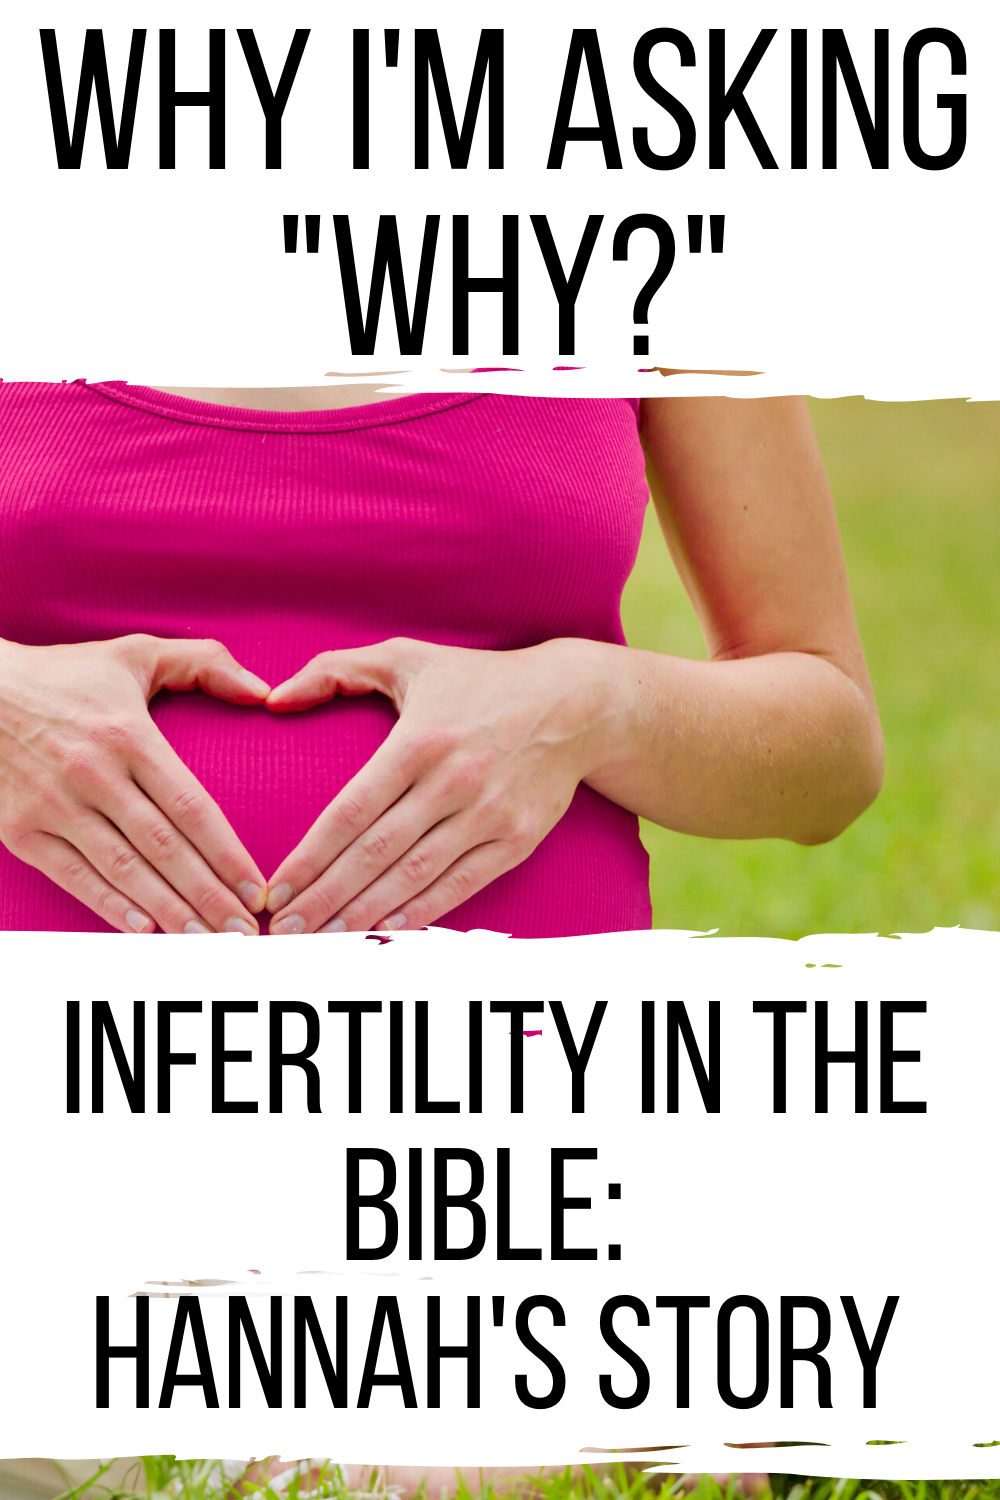 Infertility Bible lessons. What is Hannah